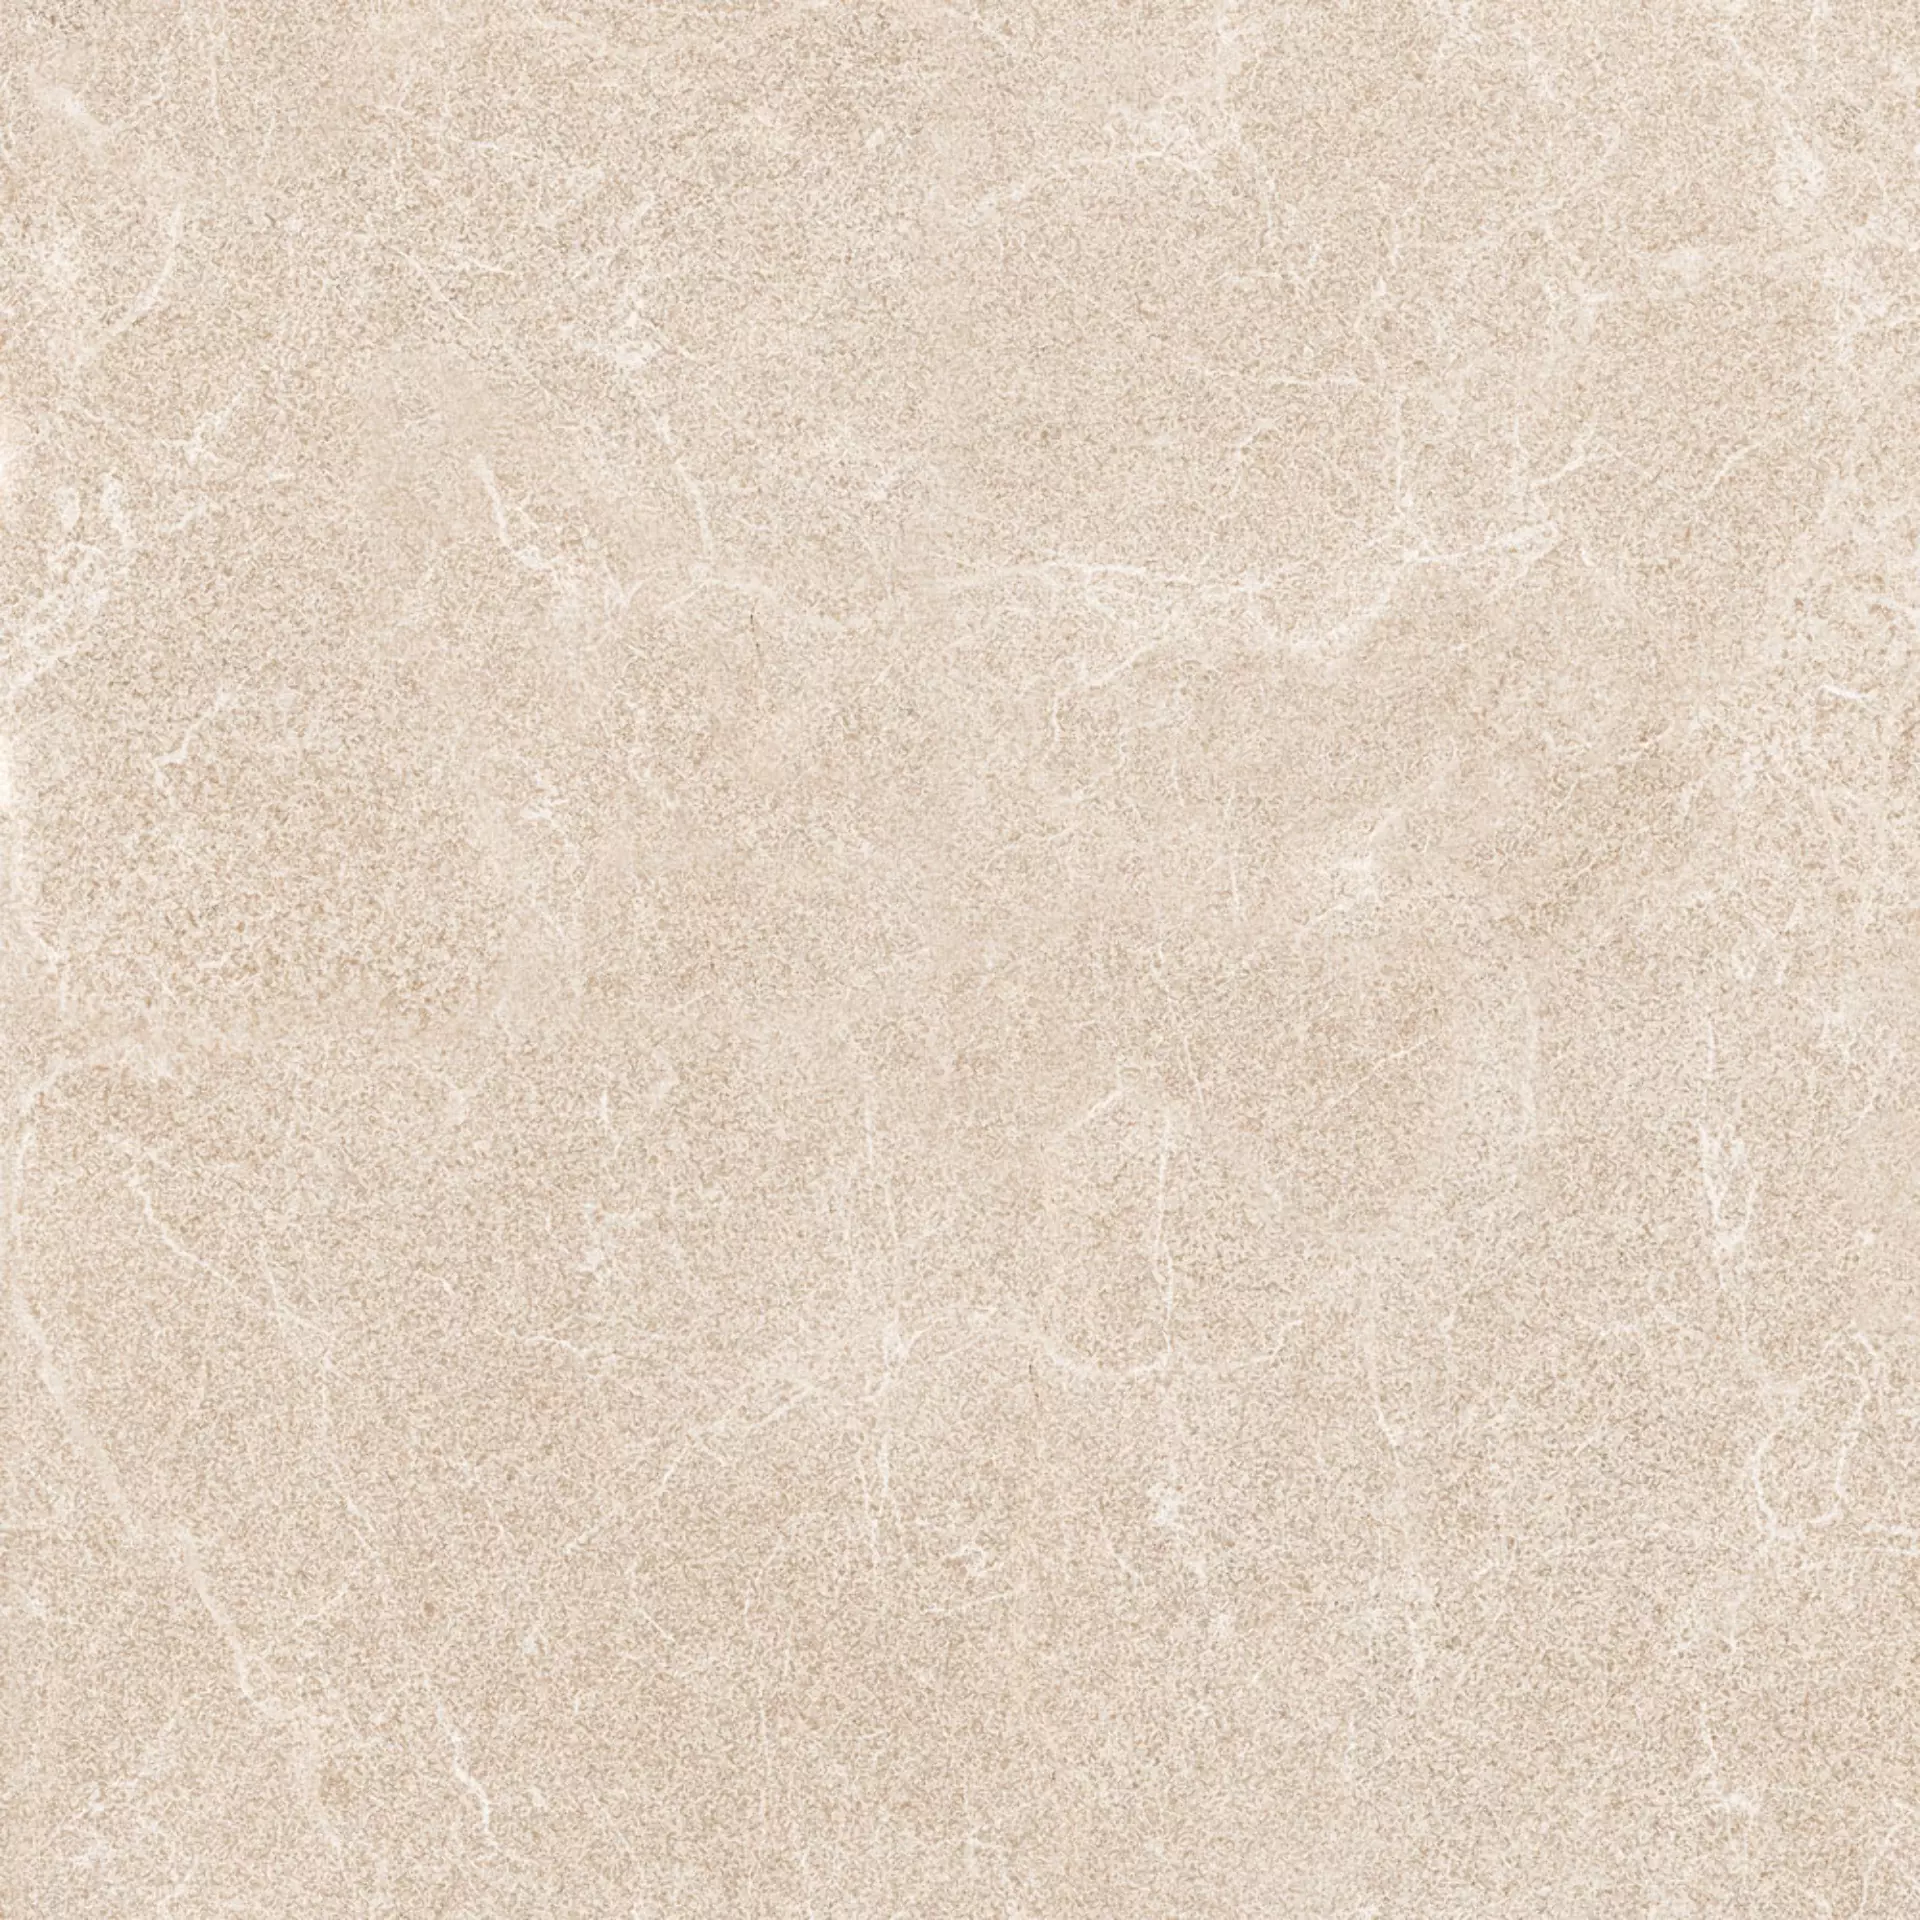 Sant Agostino Unionstone 2 Oriental Beige Natural CSAORBE660 60x60cm rectified 10mm